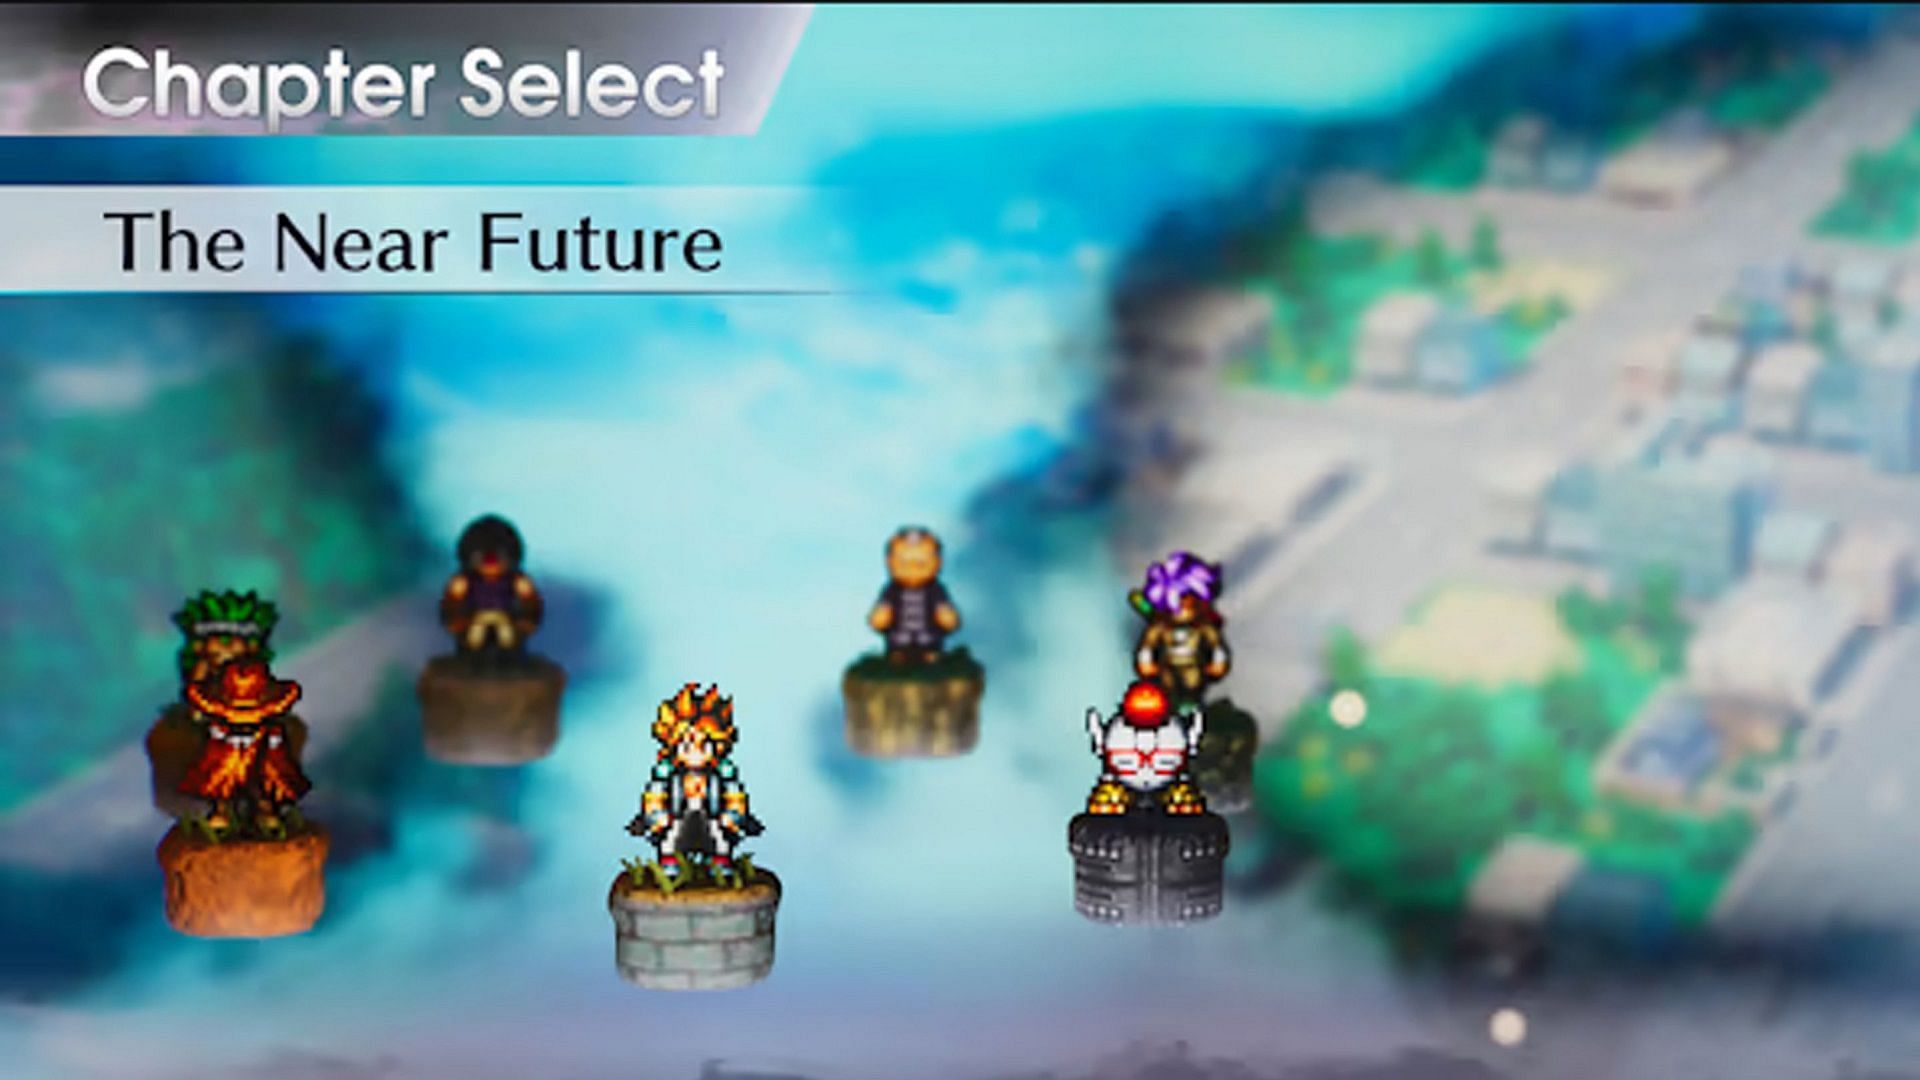 Live A Live&#039;s chapter and character select screen (Image via Square Enix)